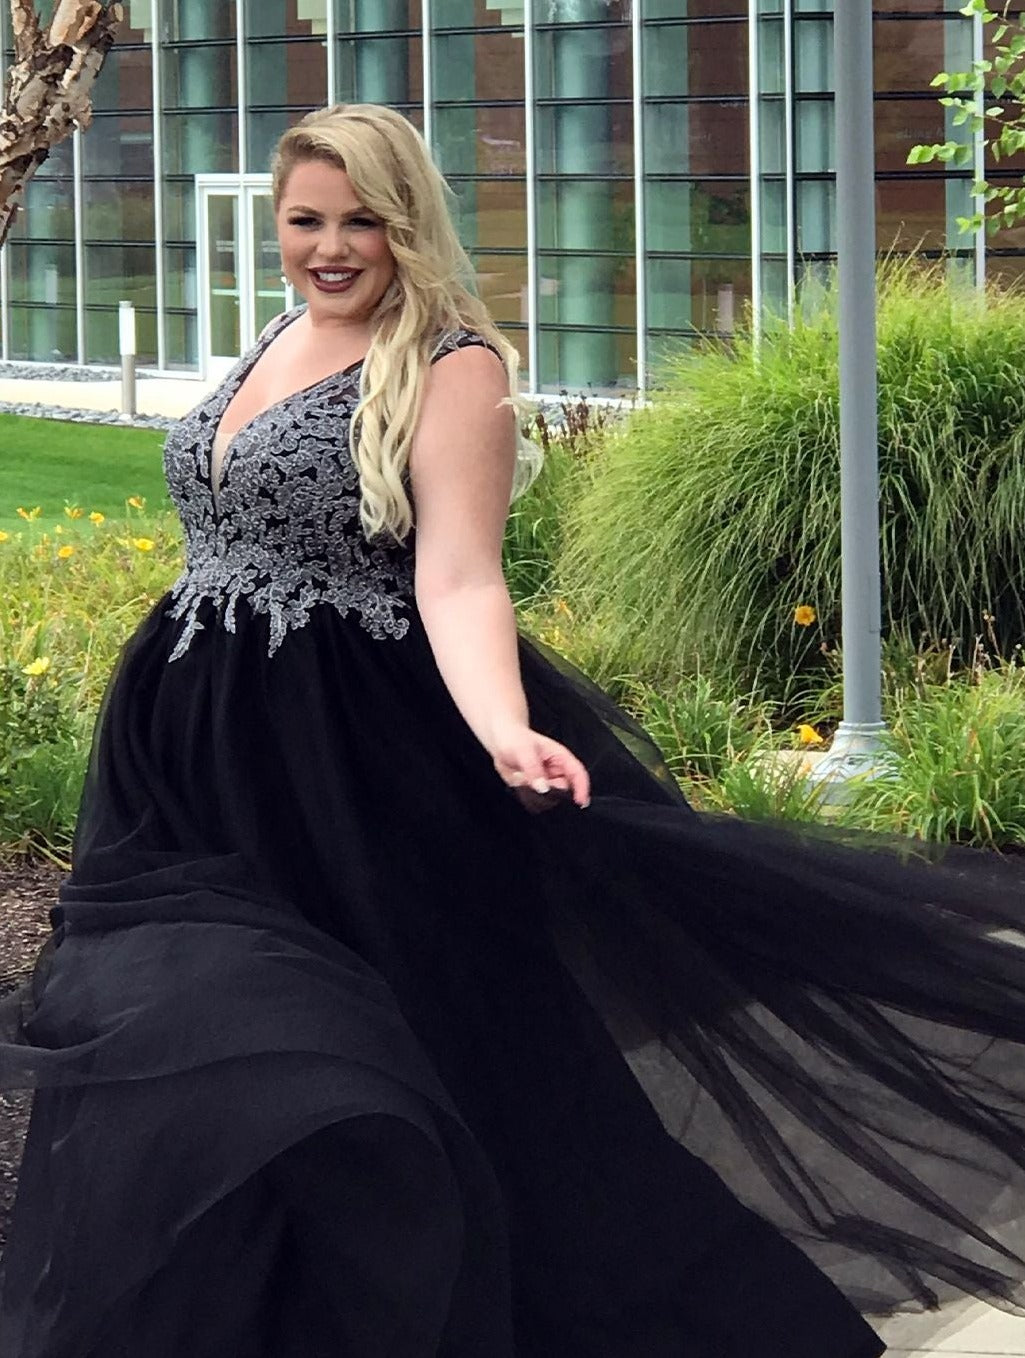 Sydney's Closet SC7298 V neckline sleeveless embellished applique lace bodice and tulle skirt prom dress evening gown ball gown  Available colors: Black Silver  Available sizes:  14, 16, 18, 20, 22, 24, 26, 28, 30, 32, 34, 36, 38, 40 